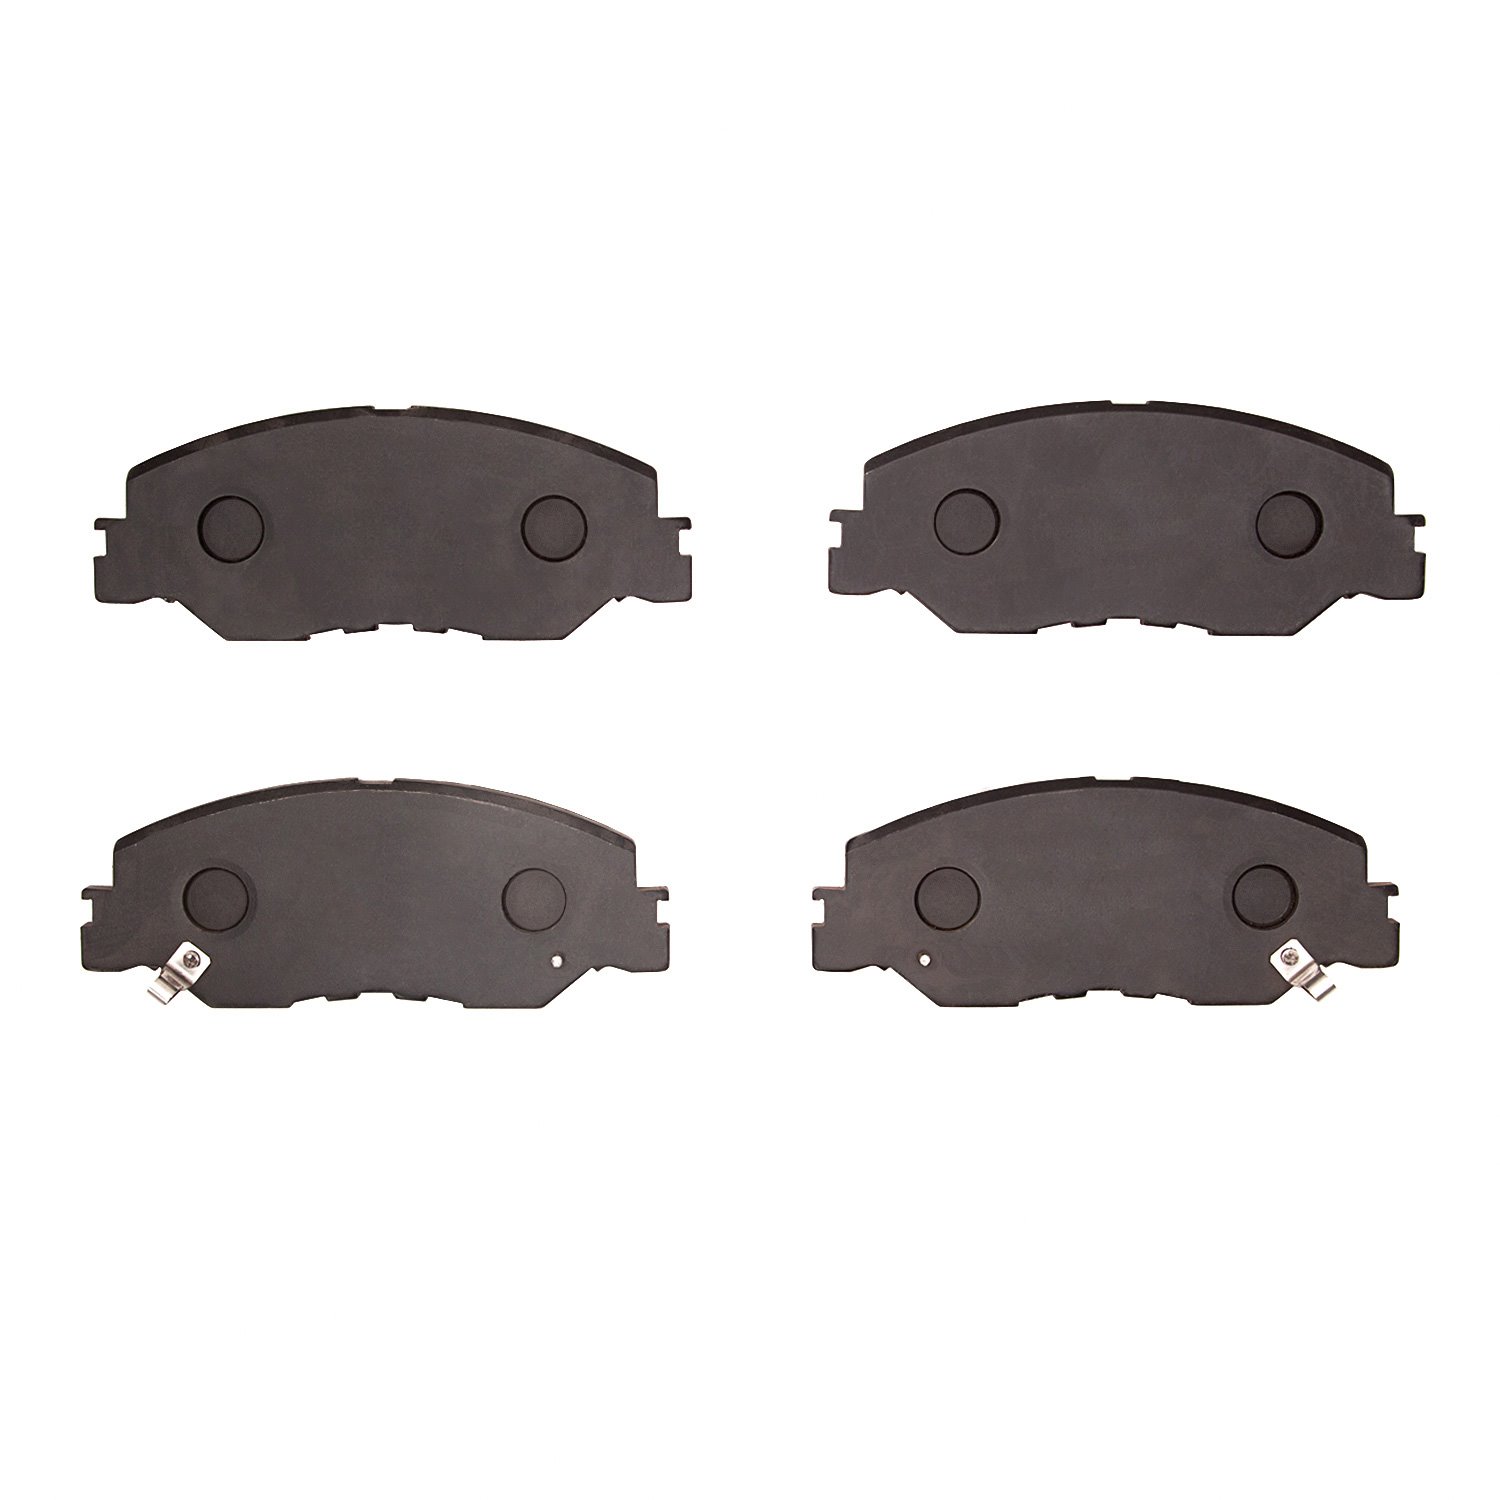 1551-2185-00 5000 Advanced Ceramic Brake Pads, Fits Select Acura/Honda, Position: Front